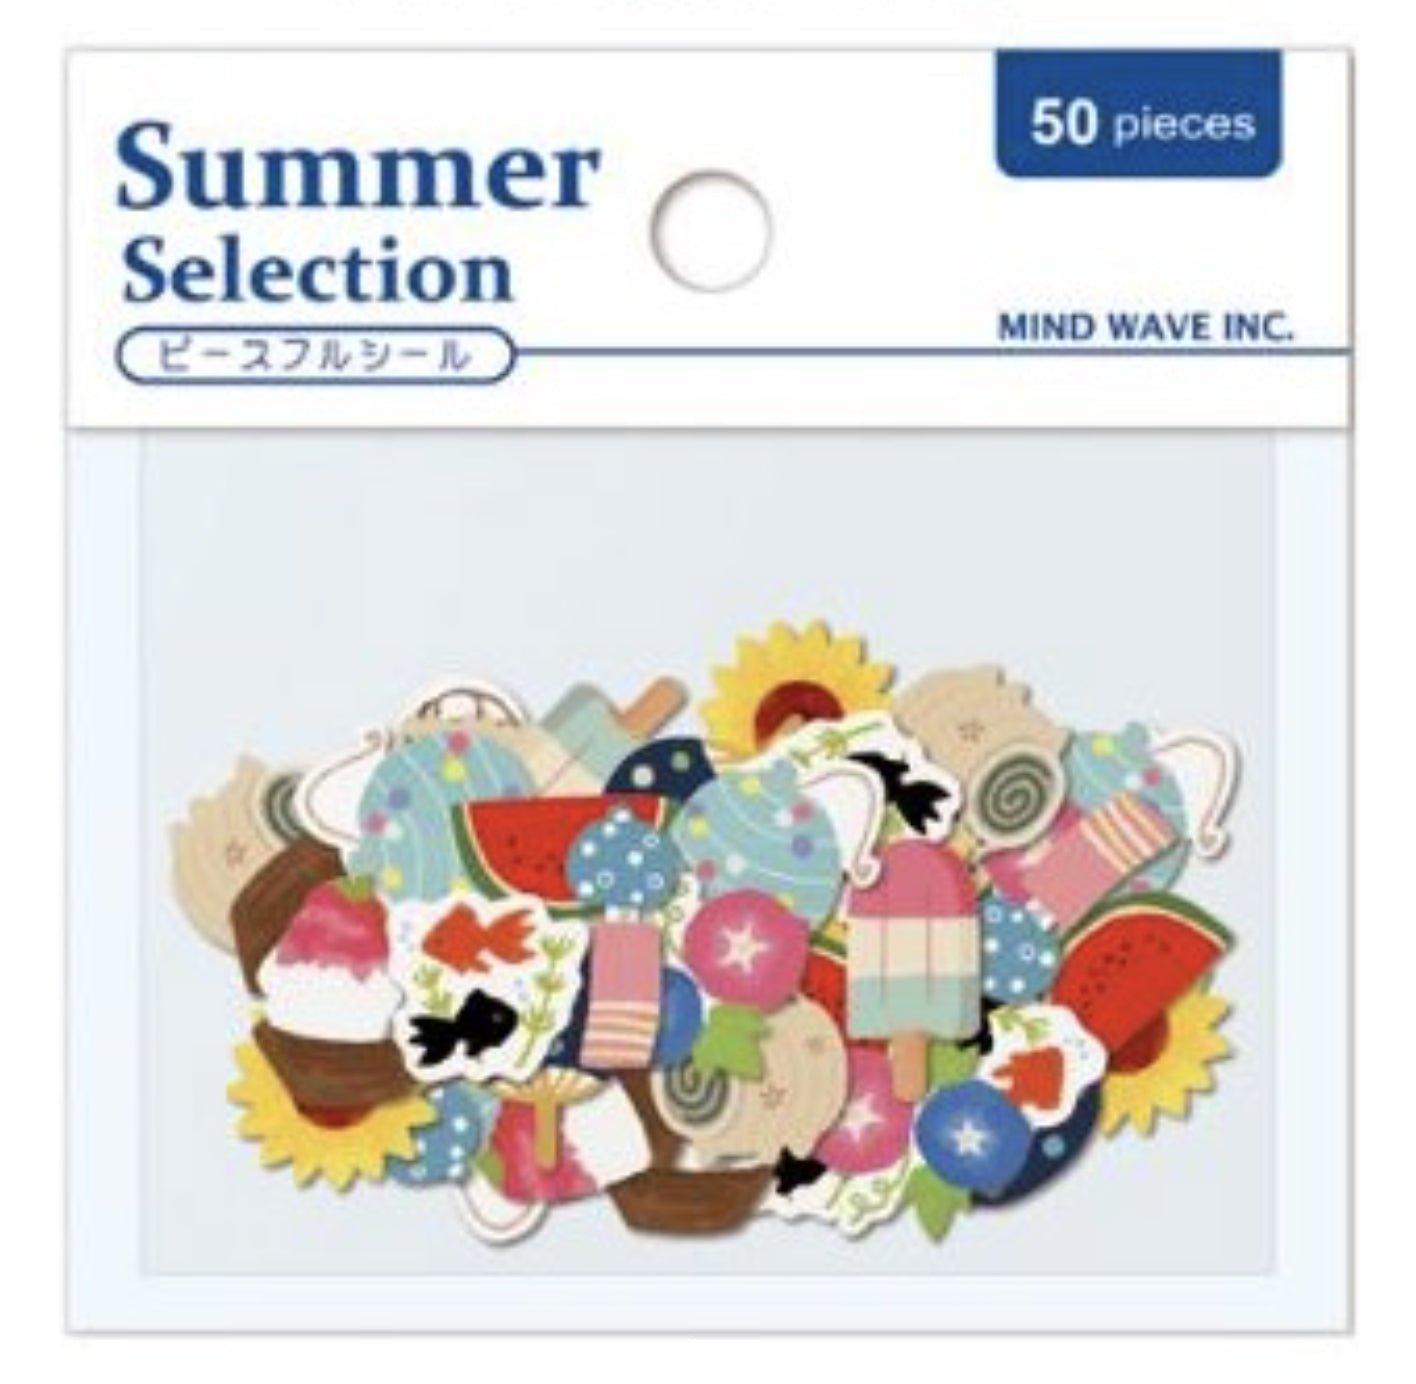 OriginalJapanese-style Hand-painted Summer Small Things Animal Ocean Series Decorative Sticker Pack Summer Sticker Pack NP-HEZQI-019 - CHL-STORE 